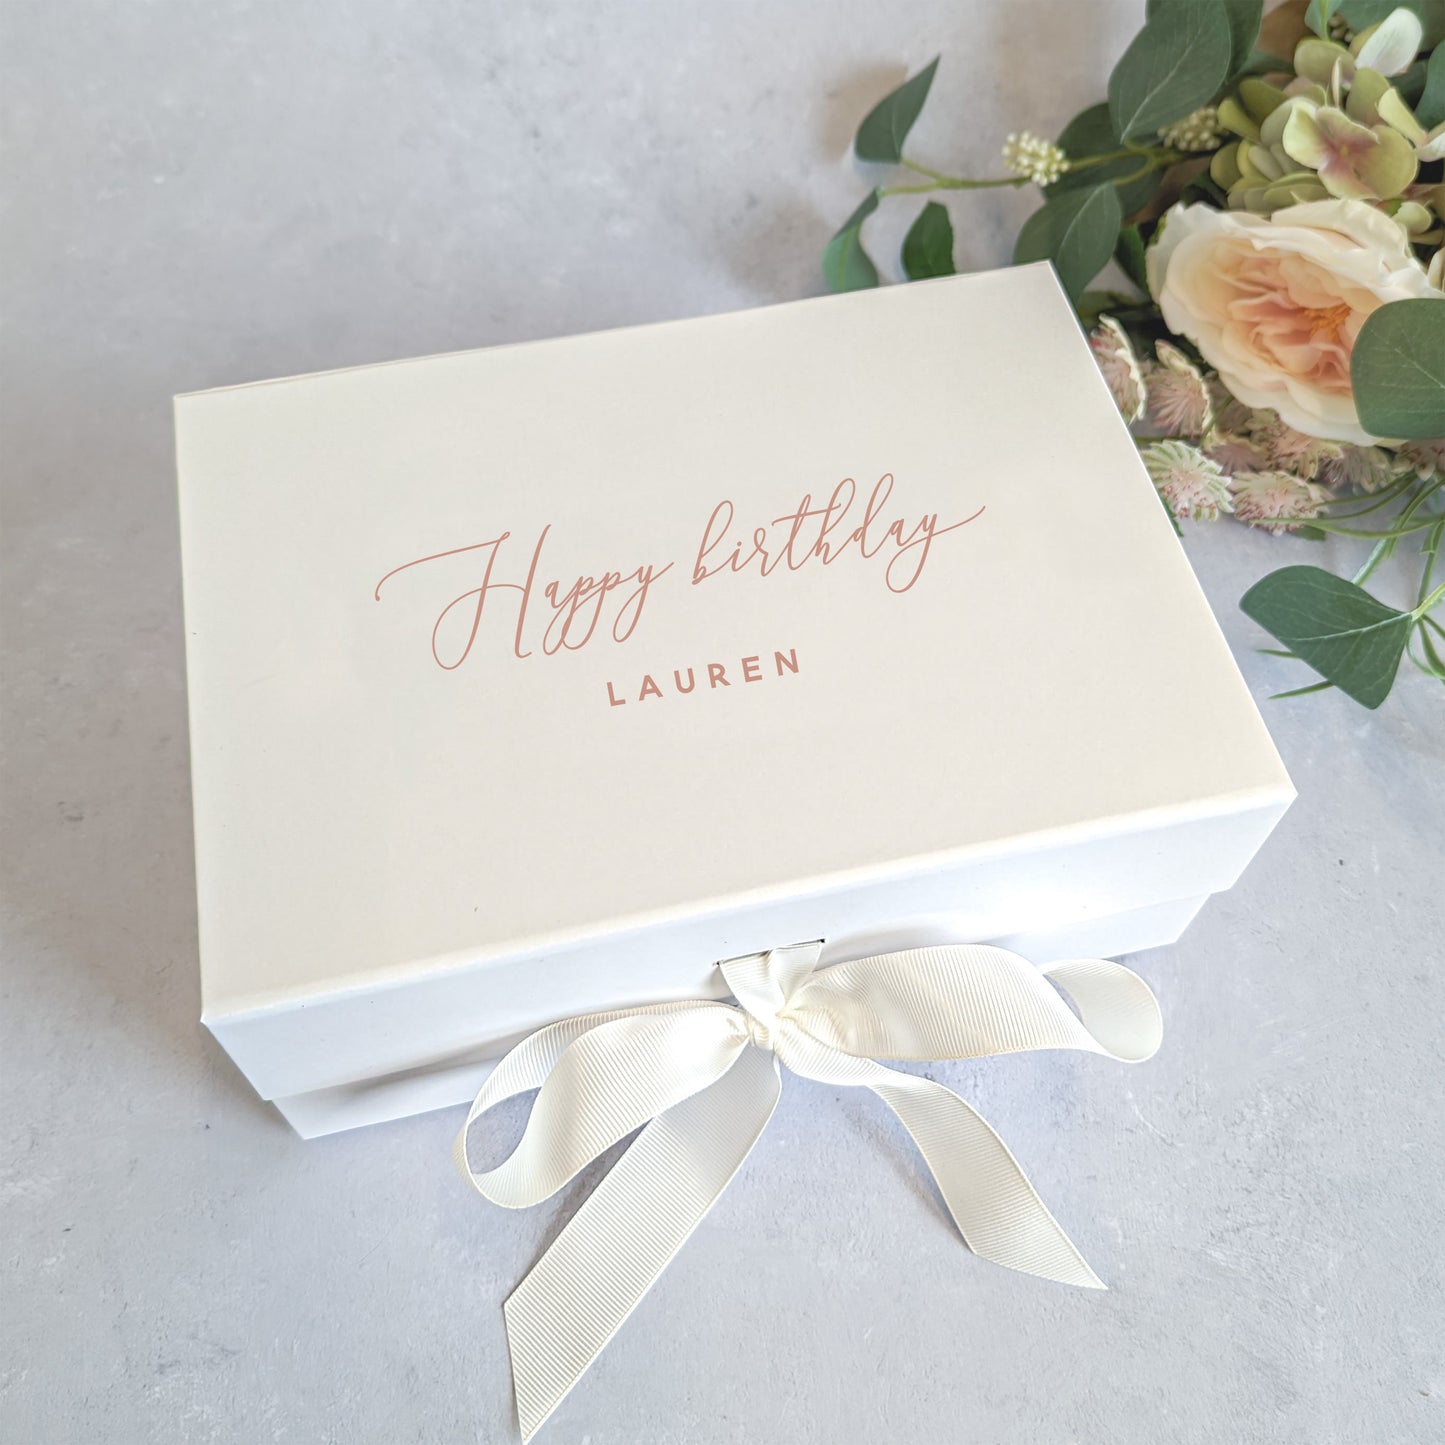 Personalised Happy Birthday or Anniversary Gift Box - Medium A5 Size